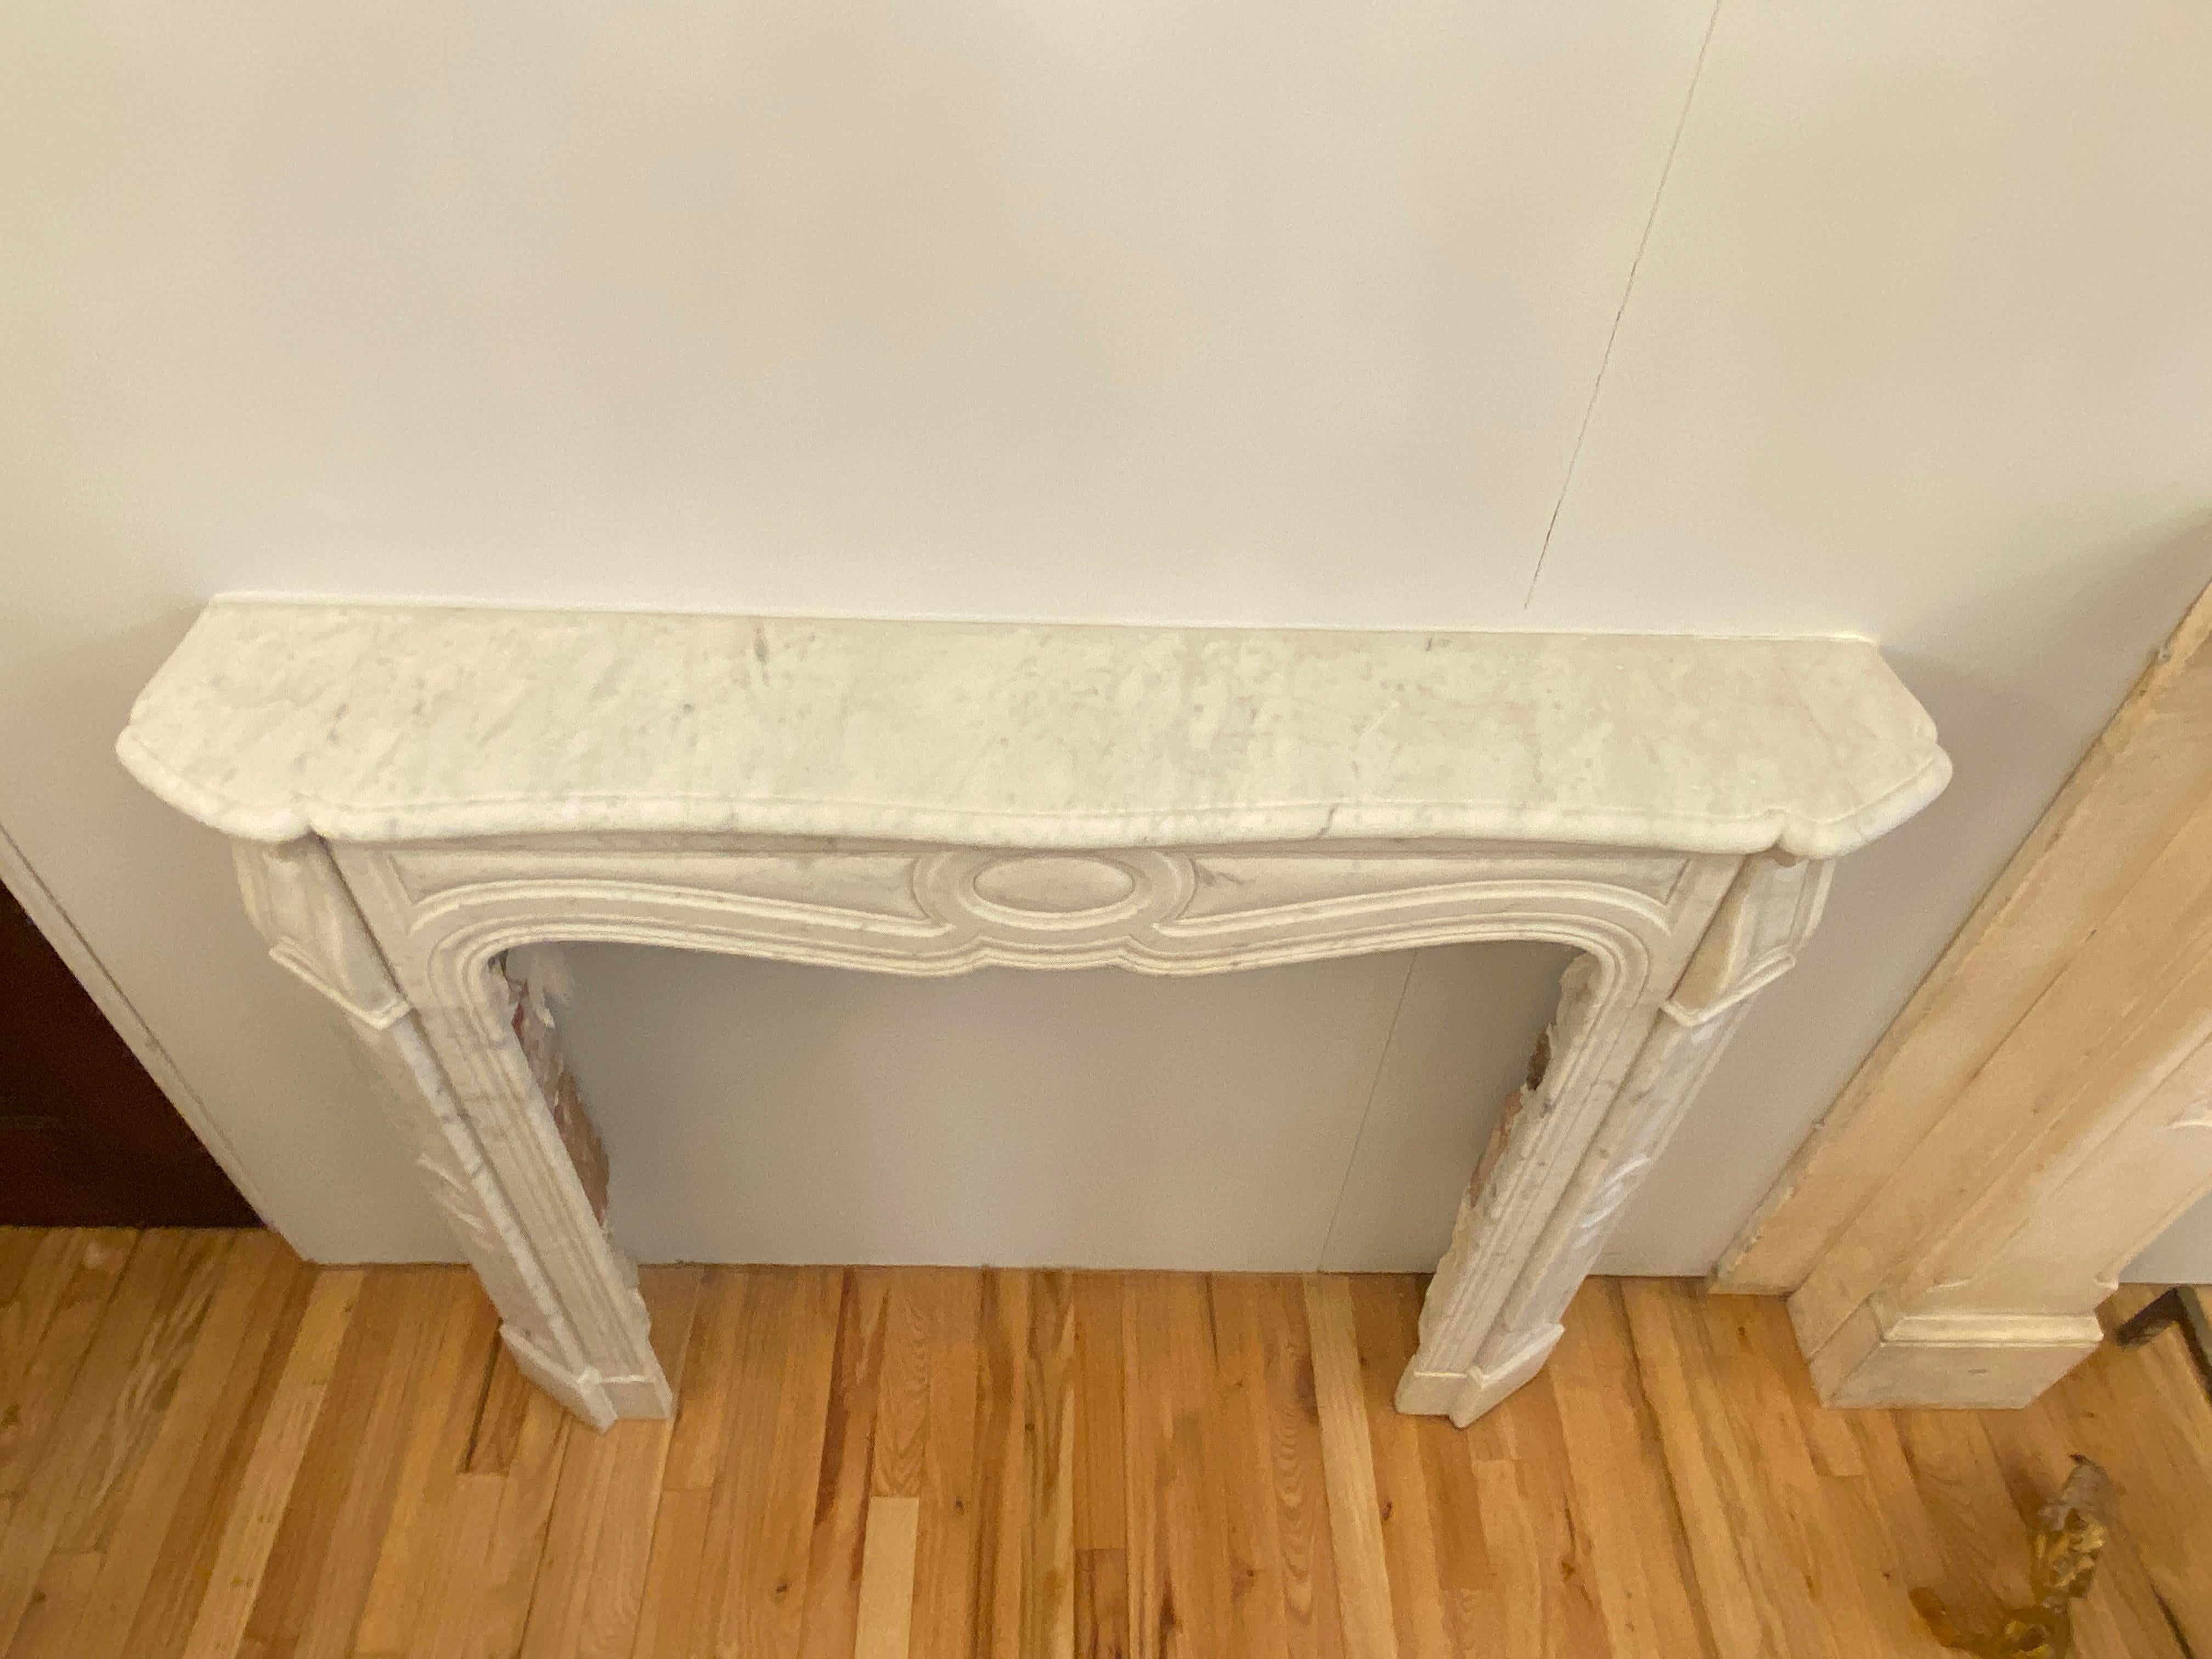 1910s Petite French White Carrara Marble Mantel from West 9th St in Manhattan 1